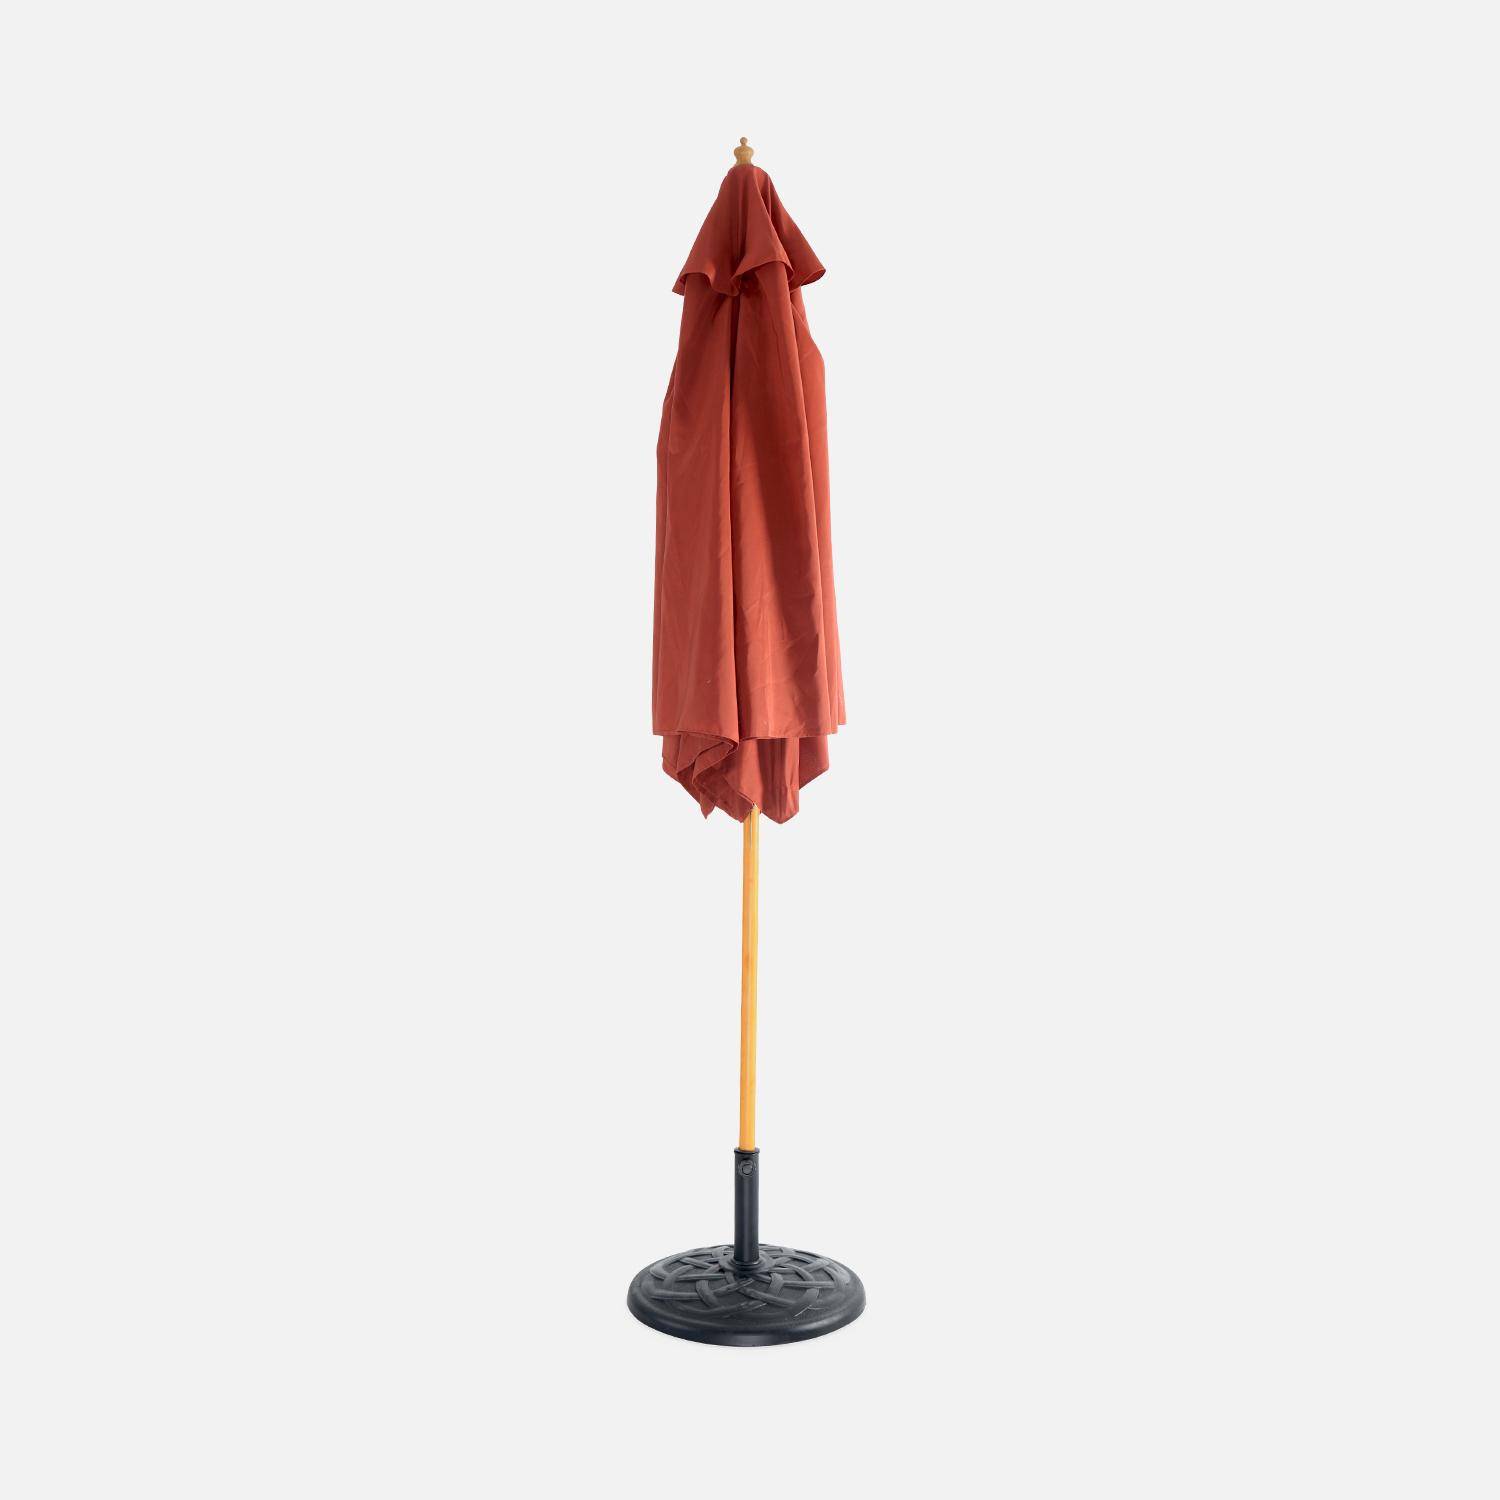 Round wooden parasol Ø300cm with straight pole -  adjustable aluminium central mast in wood and crank handle opening - Cabourg - Terracotta Photo2